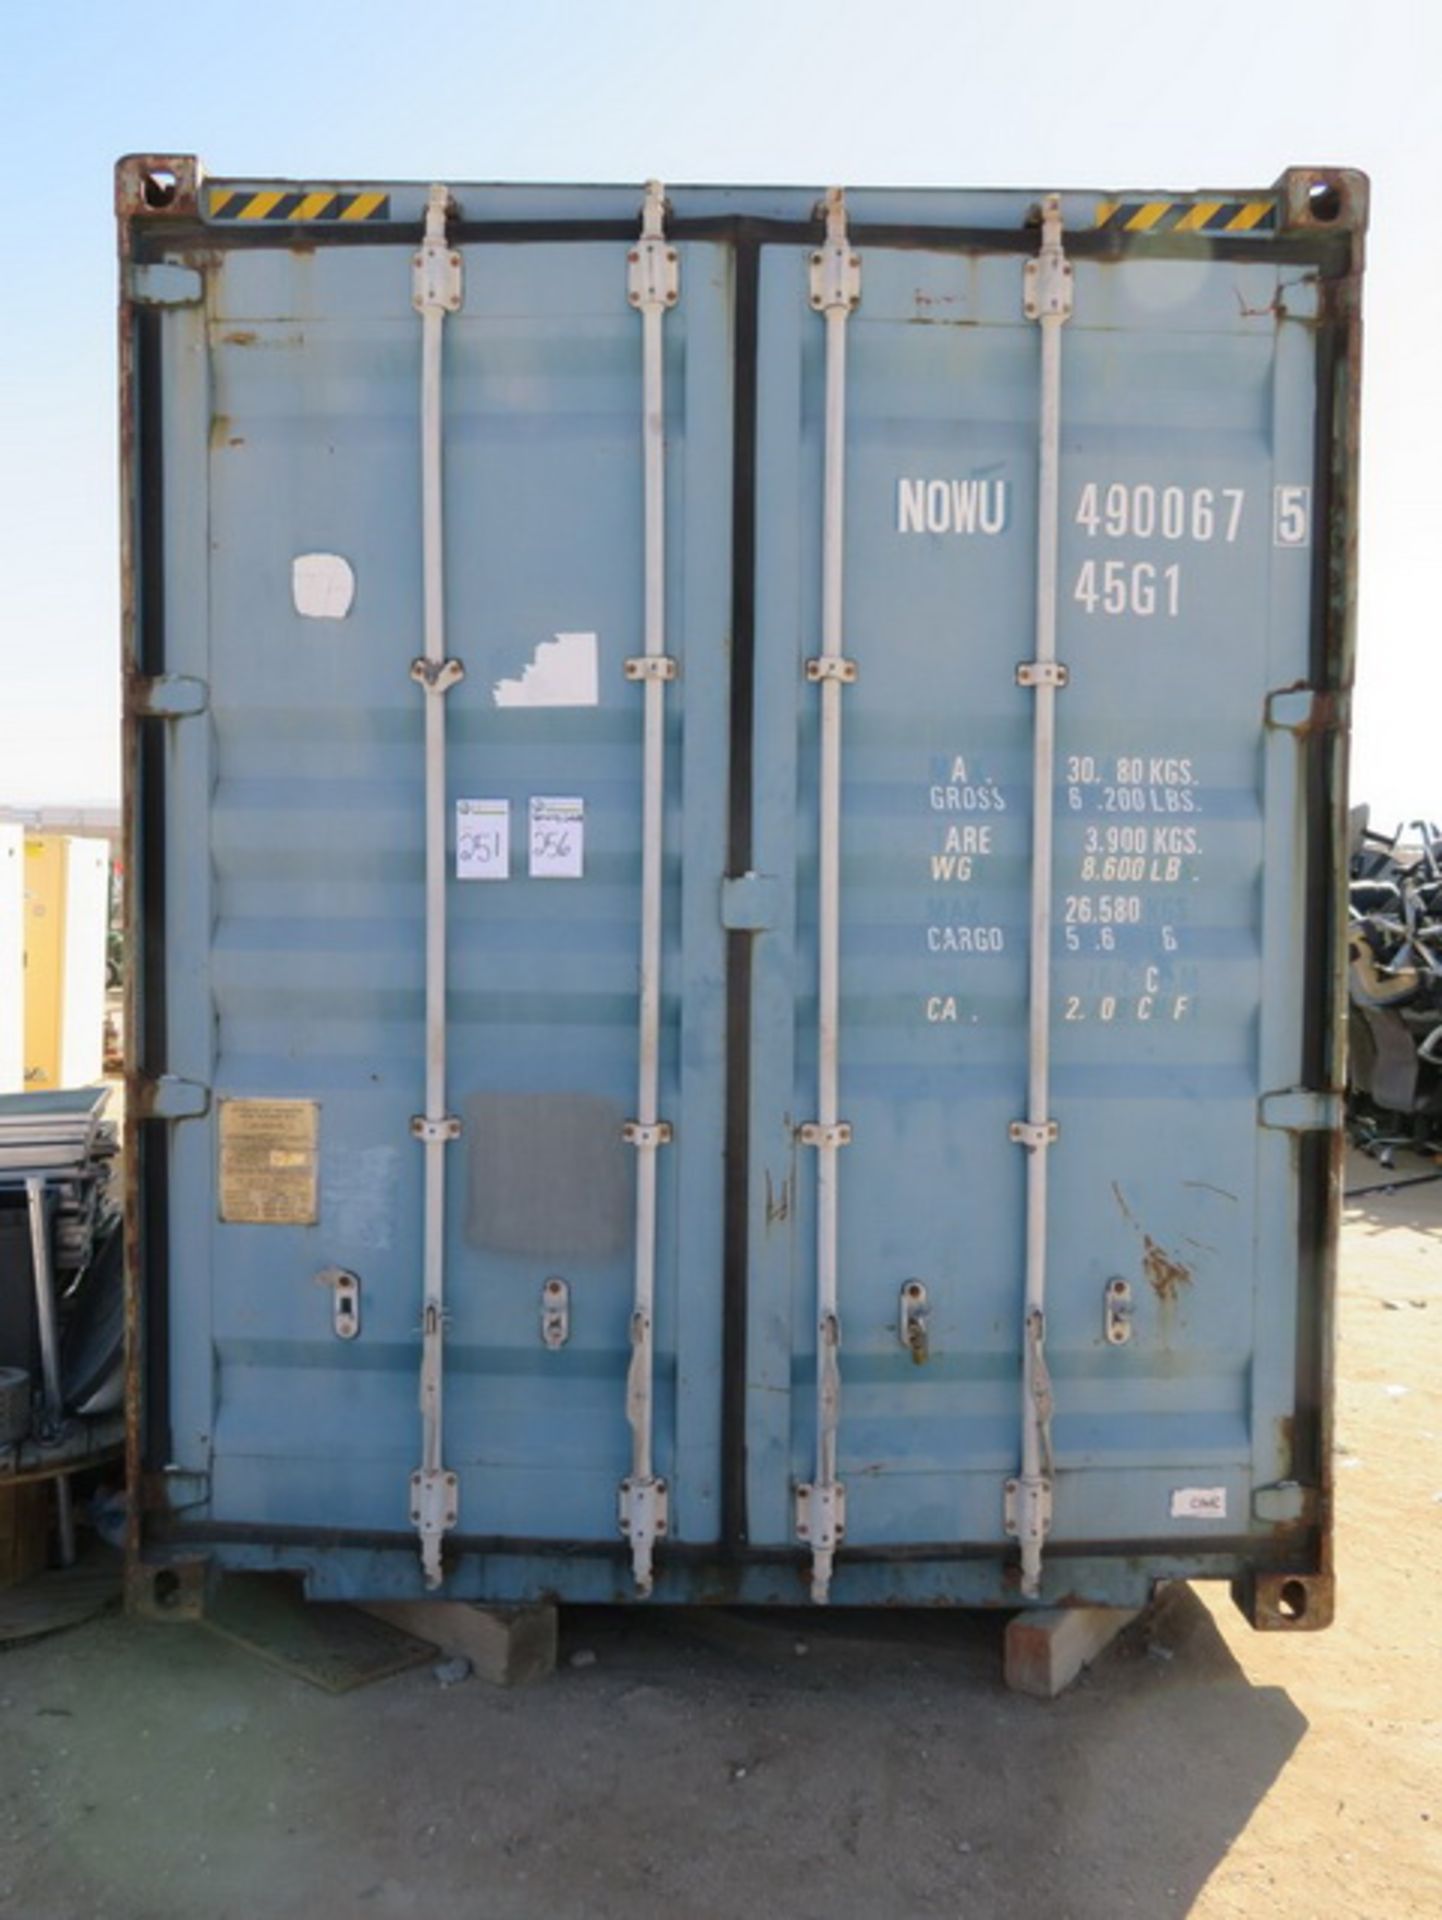 CIMC-NSSC 1AAA-10HC40-22G Shipping Container, 39' x 8' x 114"H, 8,600 LBS Tare Weight, 67,200 LB - Image 5 of 6